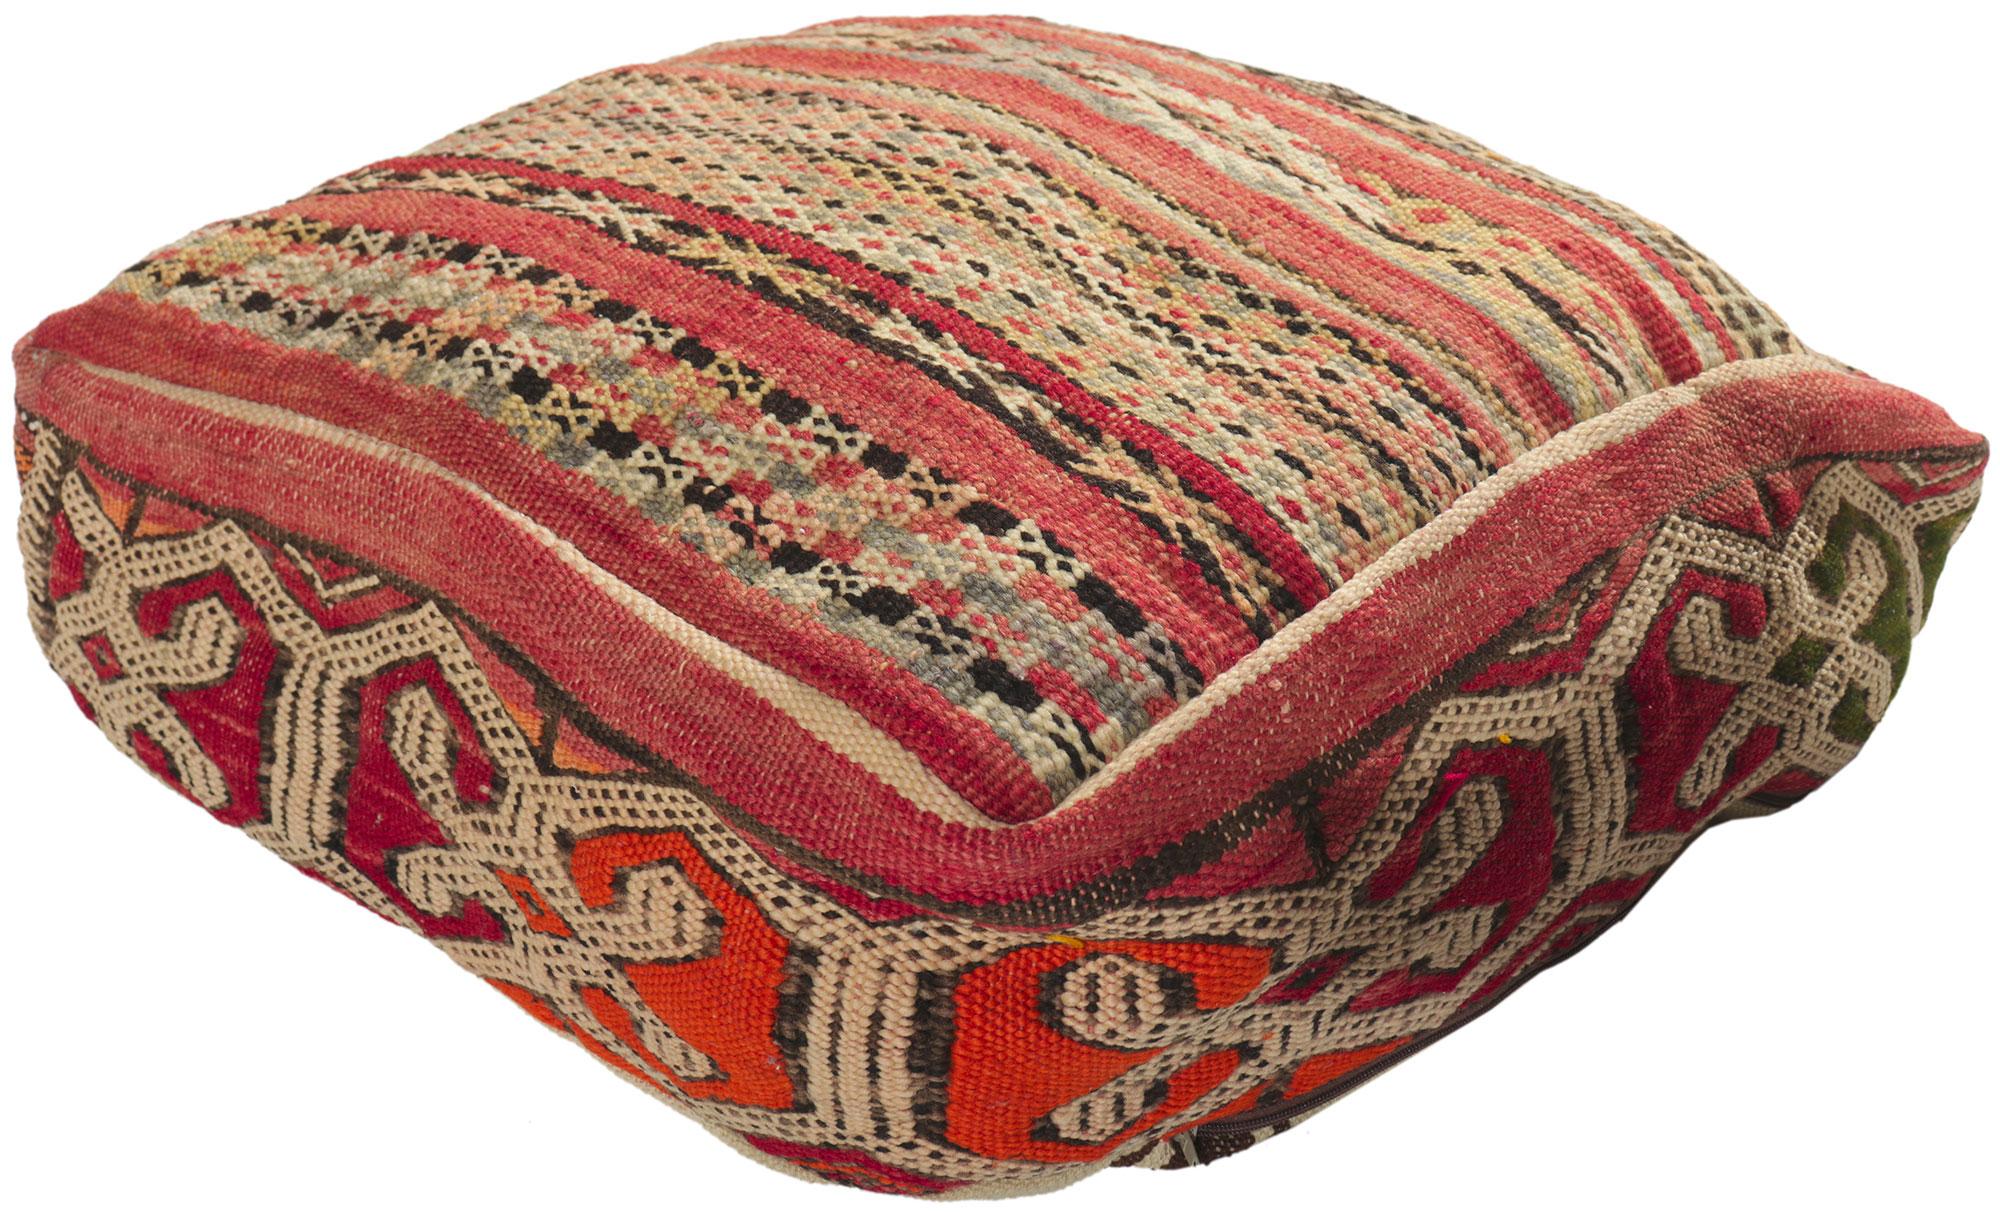 78438 Moroccan Vintage Kilim Pouf Ottoman, 2 x 2 x 1. 
Emanating nomadic charm with elements of comfort and functional versatility, this vintage Moroccan pouf conjures the spirit of Morocco. Made by talented artisans from the Atas Mountains of